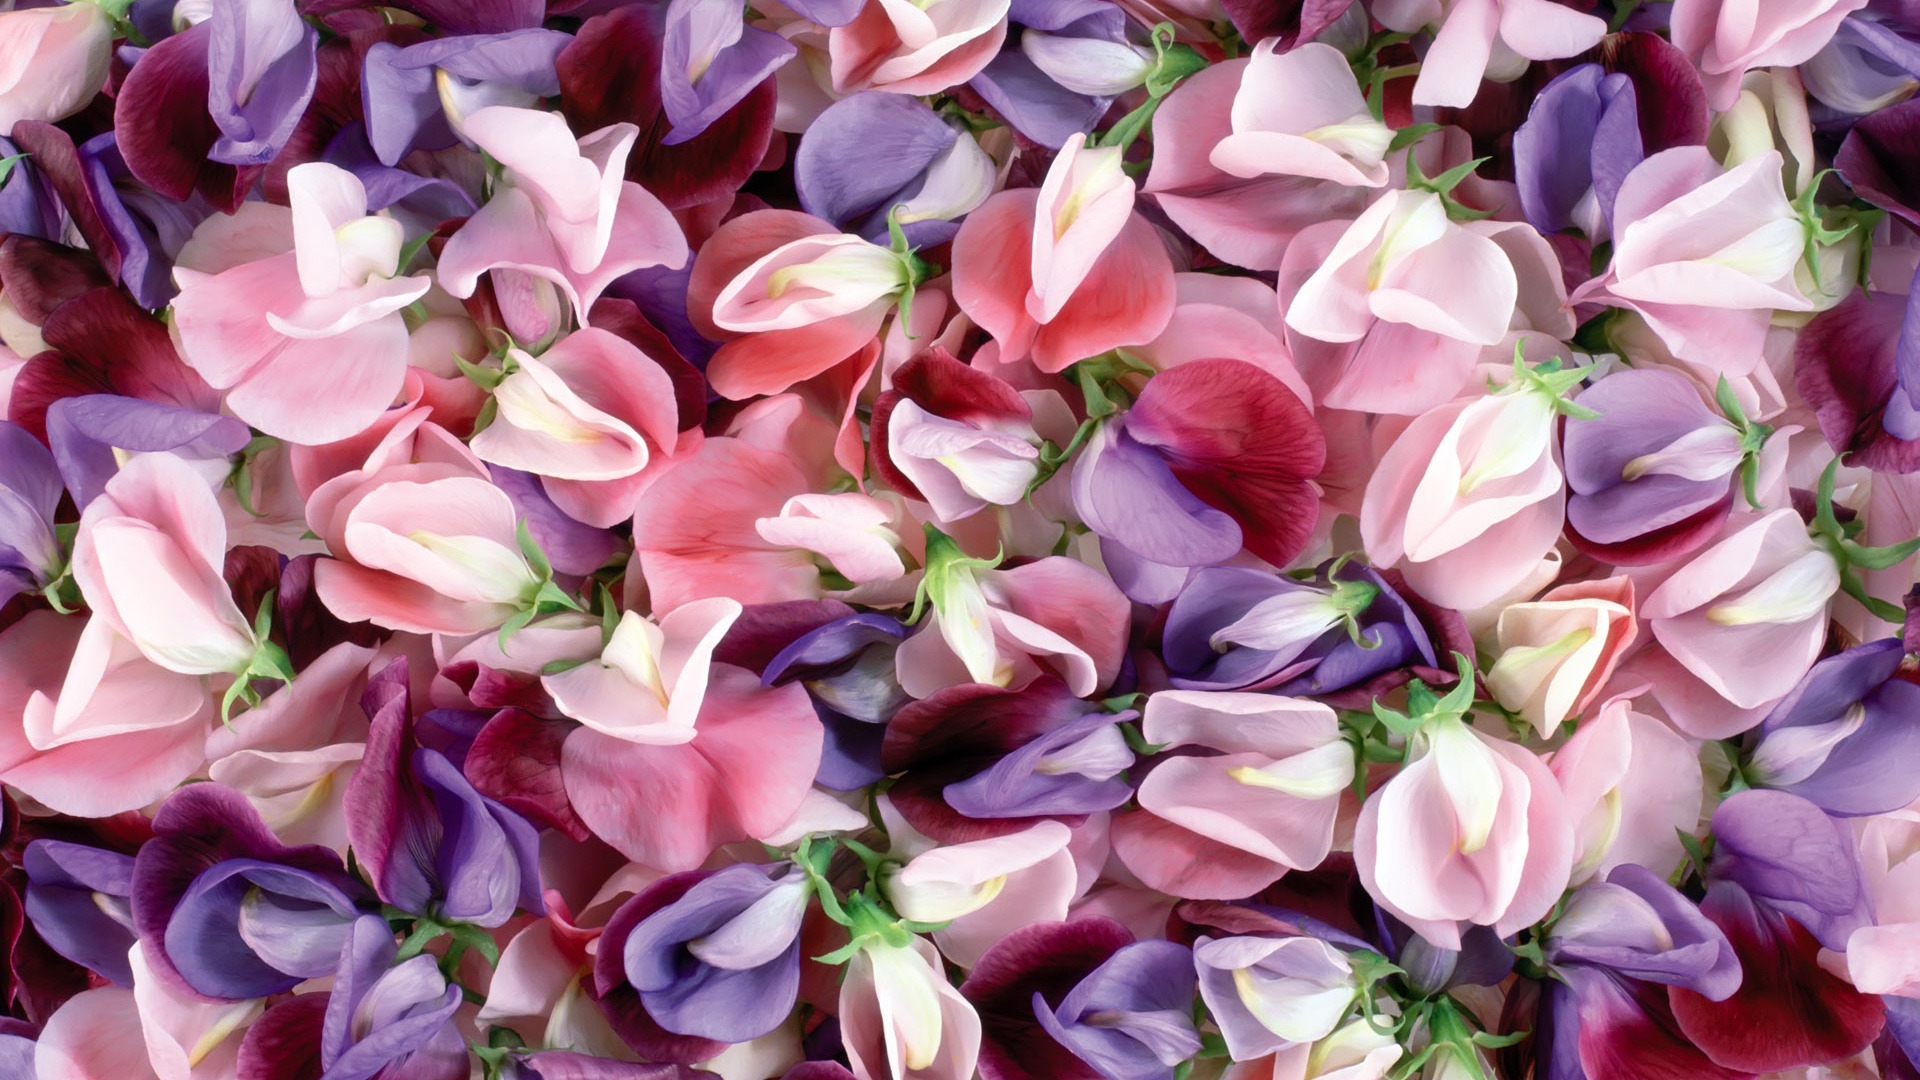 Purple and pink flowers for 1920 x 1080 HDTV 1080p resolution